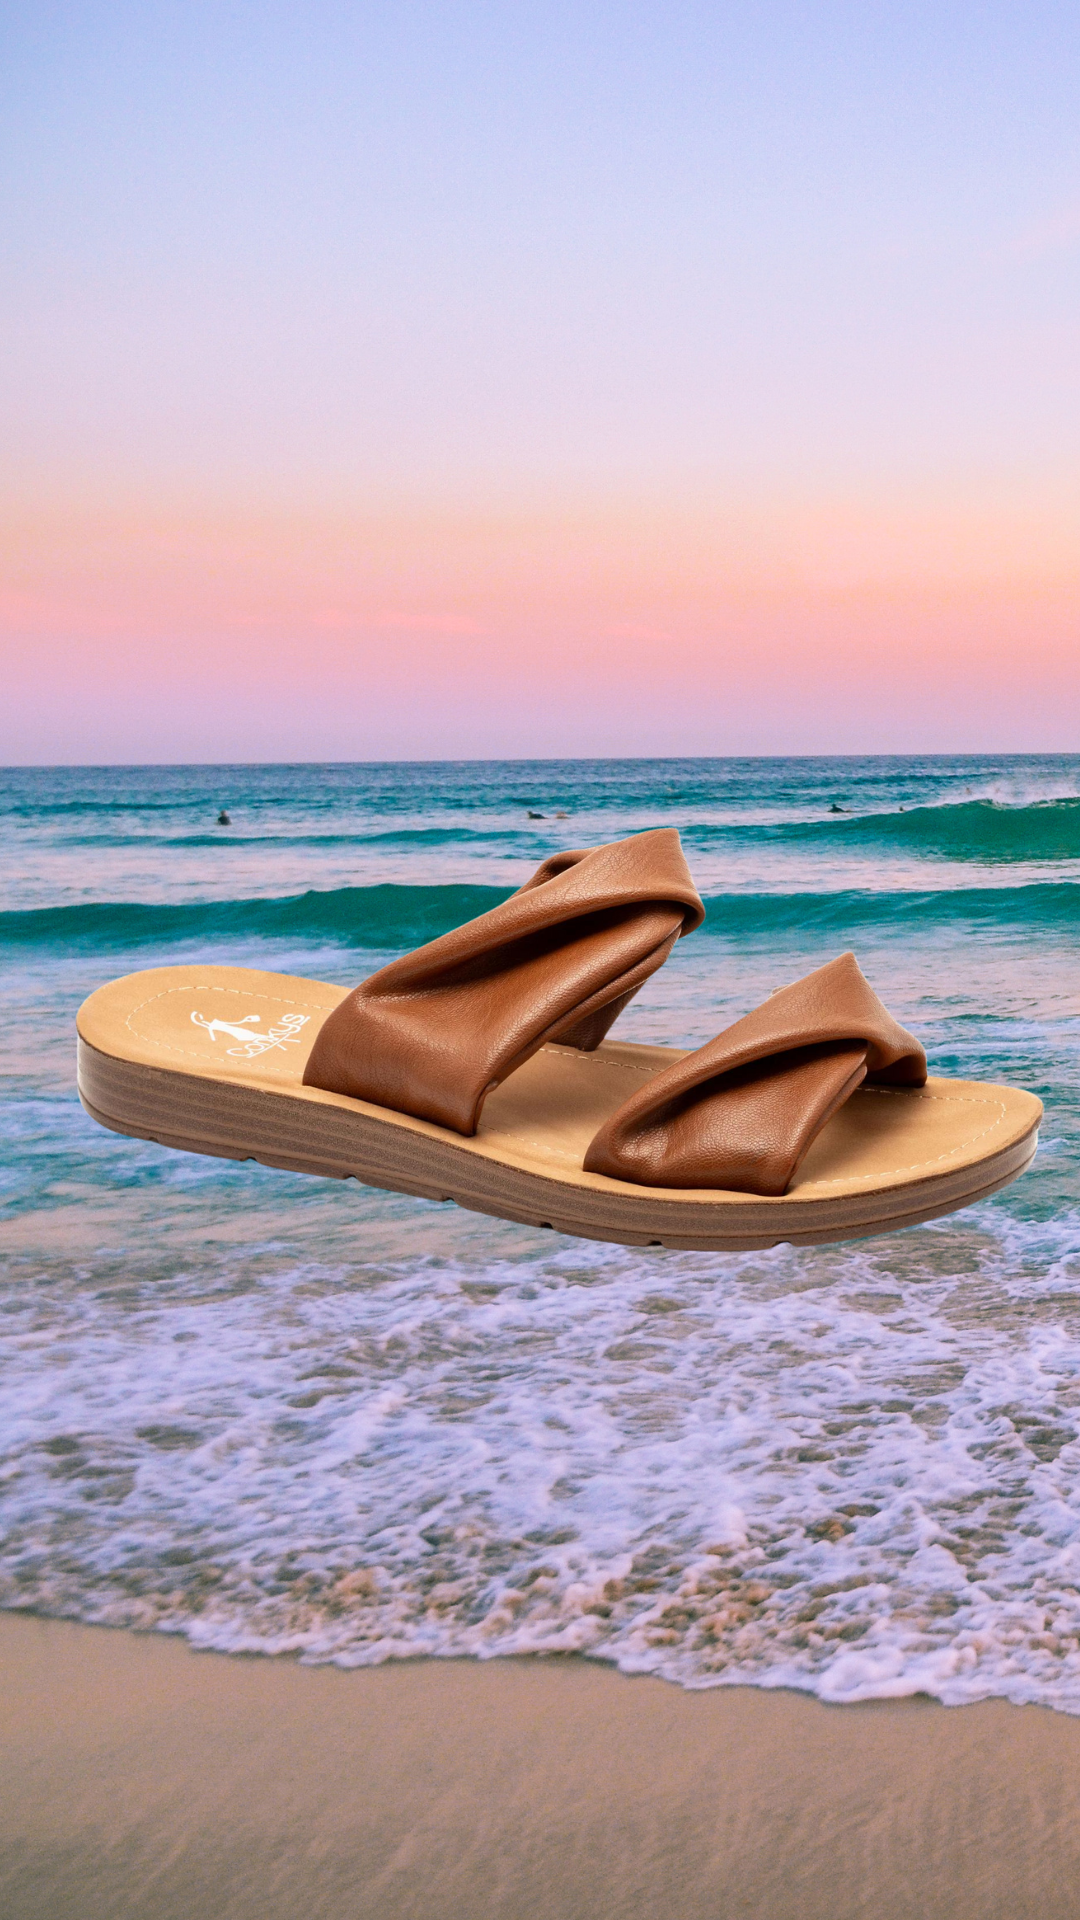 Market Live Preorder: With A Twist Sandal by Corky’s (Ships in 2-3 Weeks)